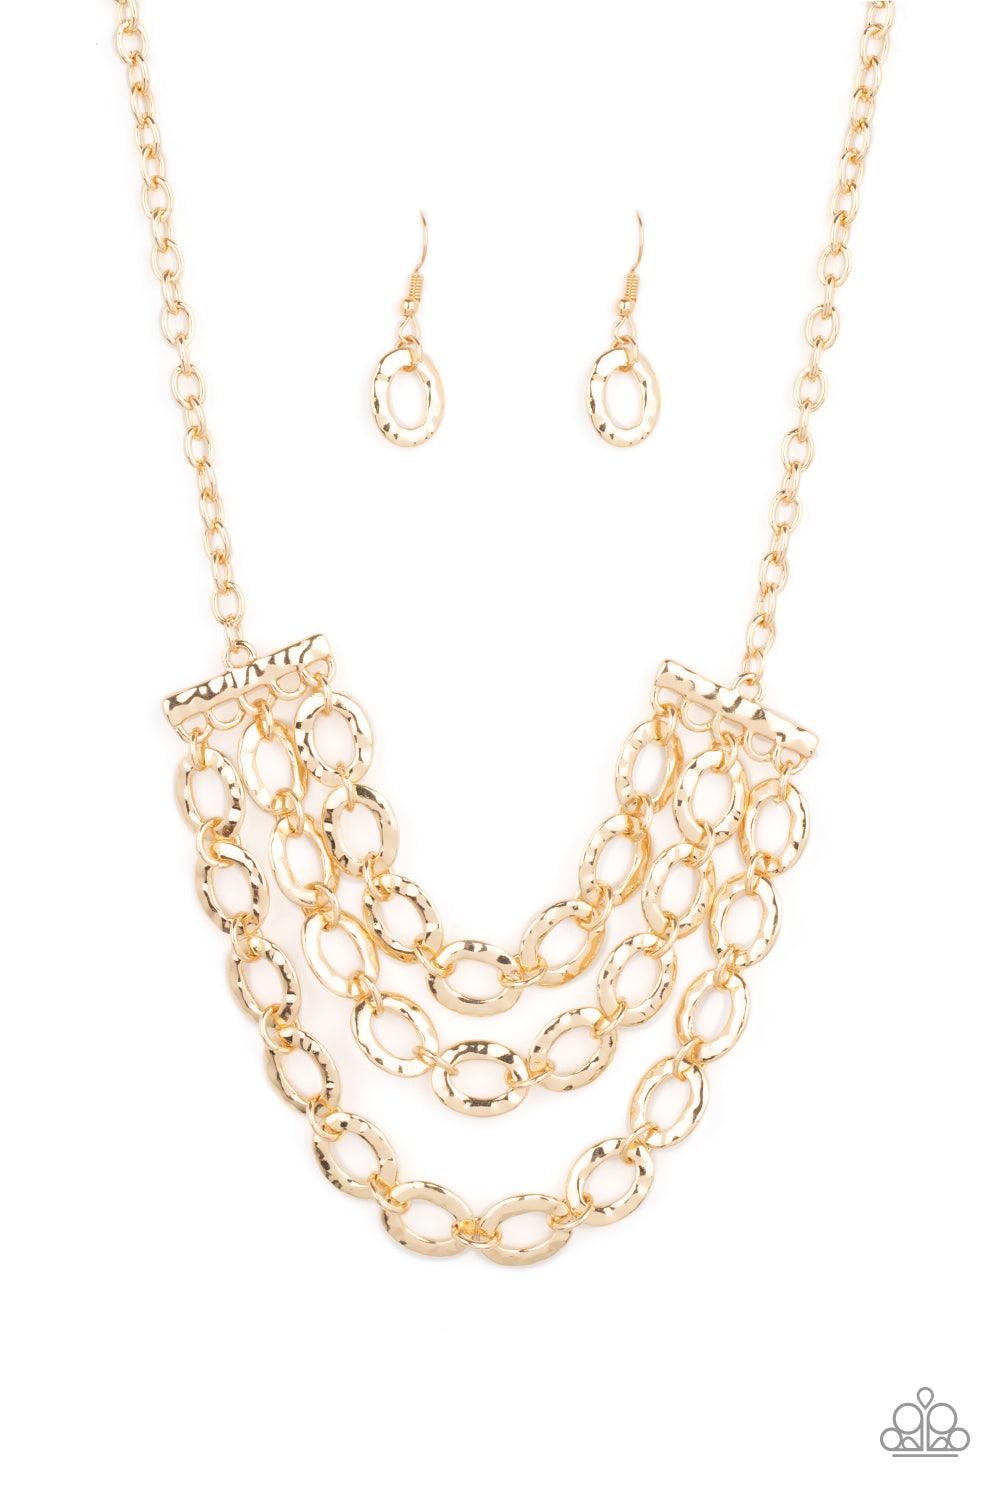 Paparazzi Accessories Repeat After Me - Gold Three rows of gold chains with oversized hammered oval links attach to gold bars for an edgy display below the collar. Features an adjustable clasp closure. Sold as one individual necklace. Includes one pair of